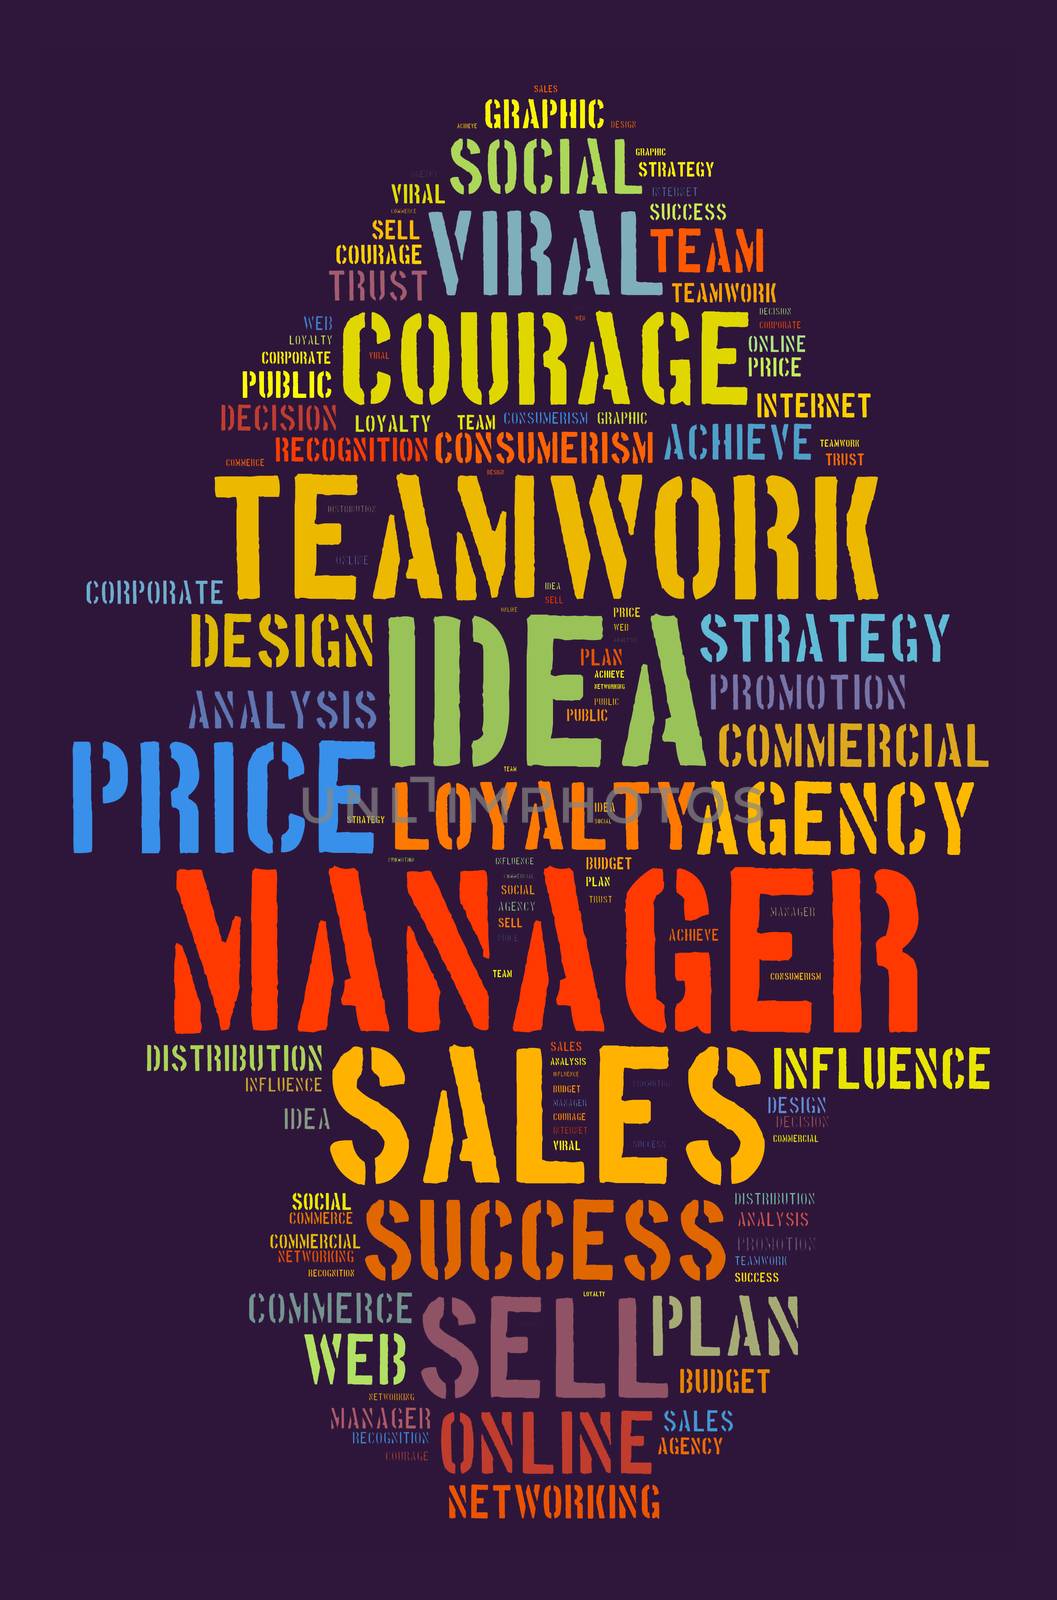 Manager word cloud concept over white background